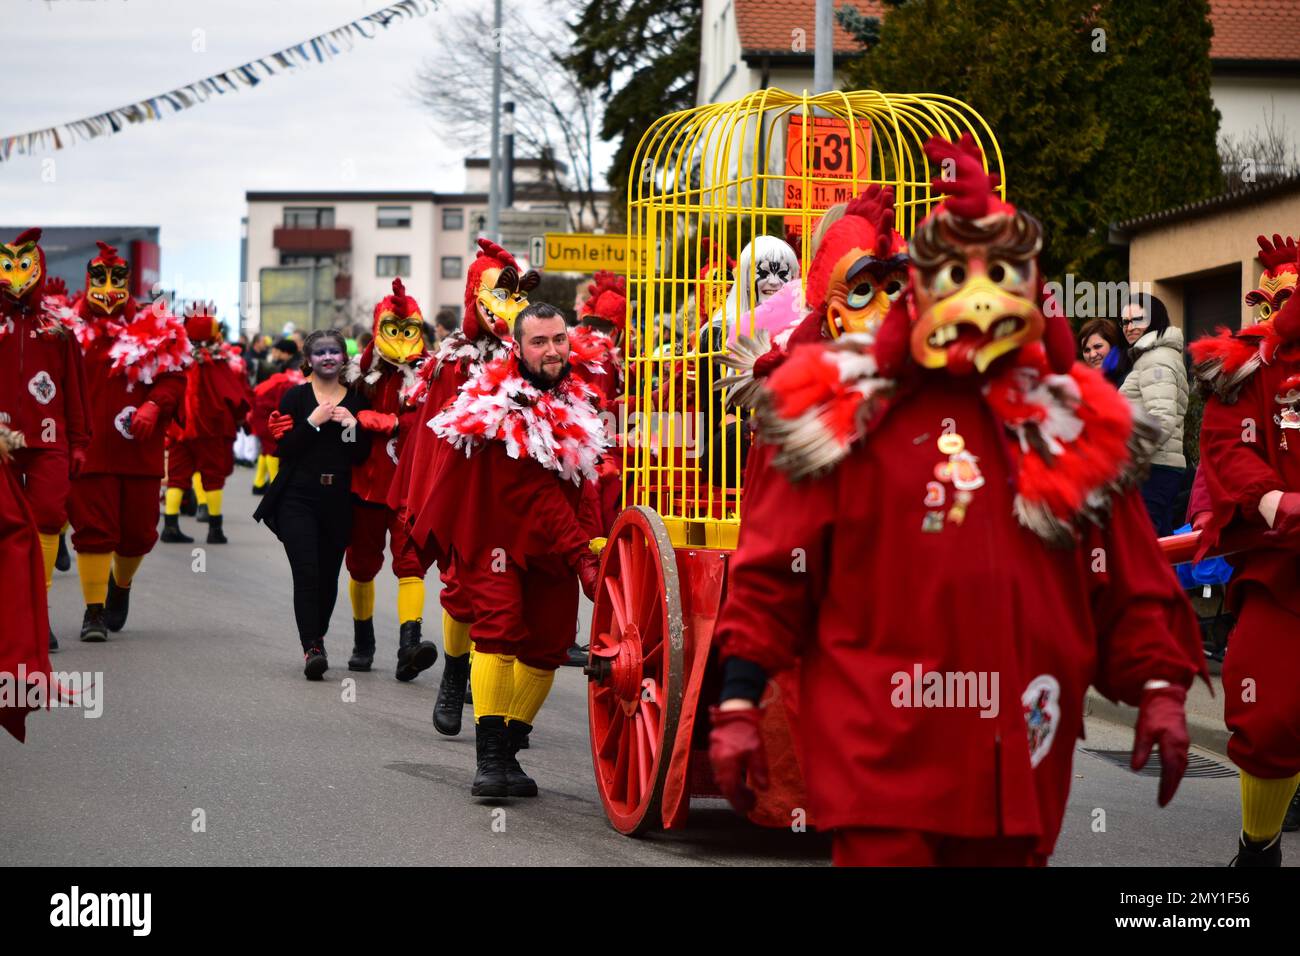 A German Carnival ceremony in the streets of Neuhausen with people in red rooster costumes and caged prisoners parading Stock Photo